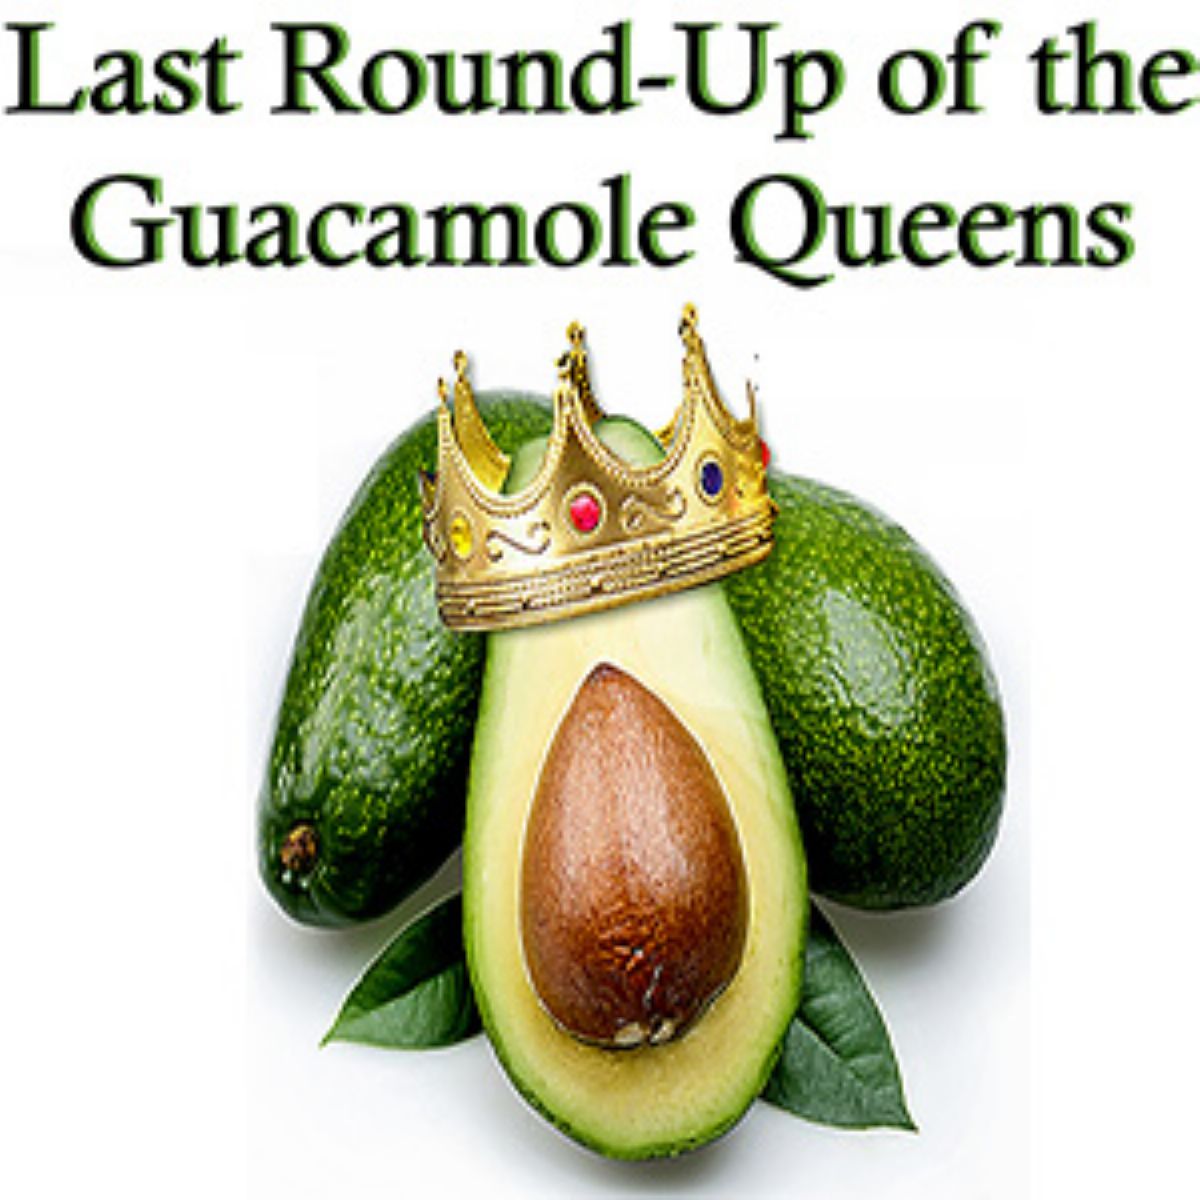 2022 AcTAG's 'Last Round-Up of the Guacamole Queens'